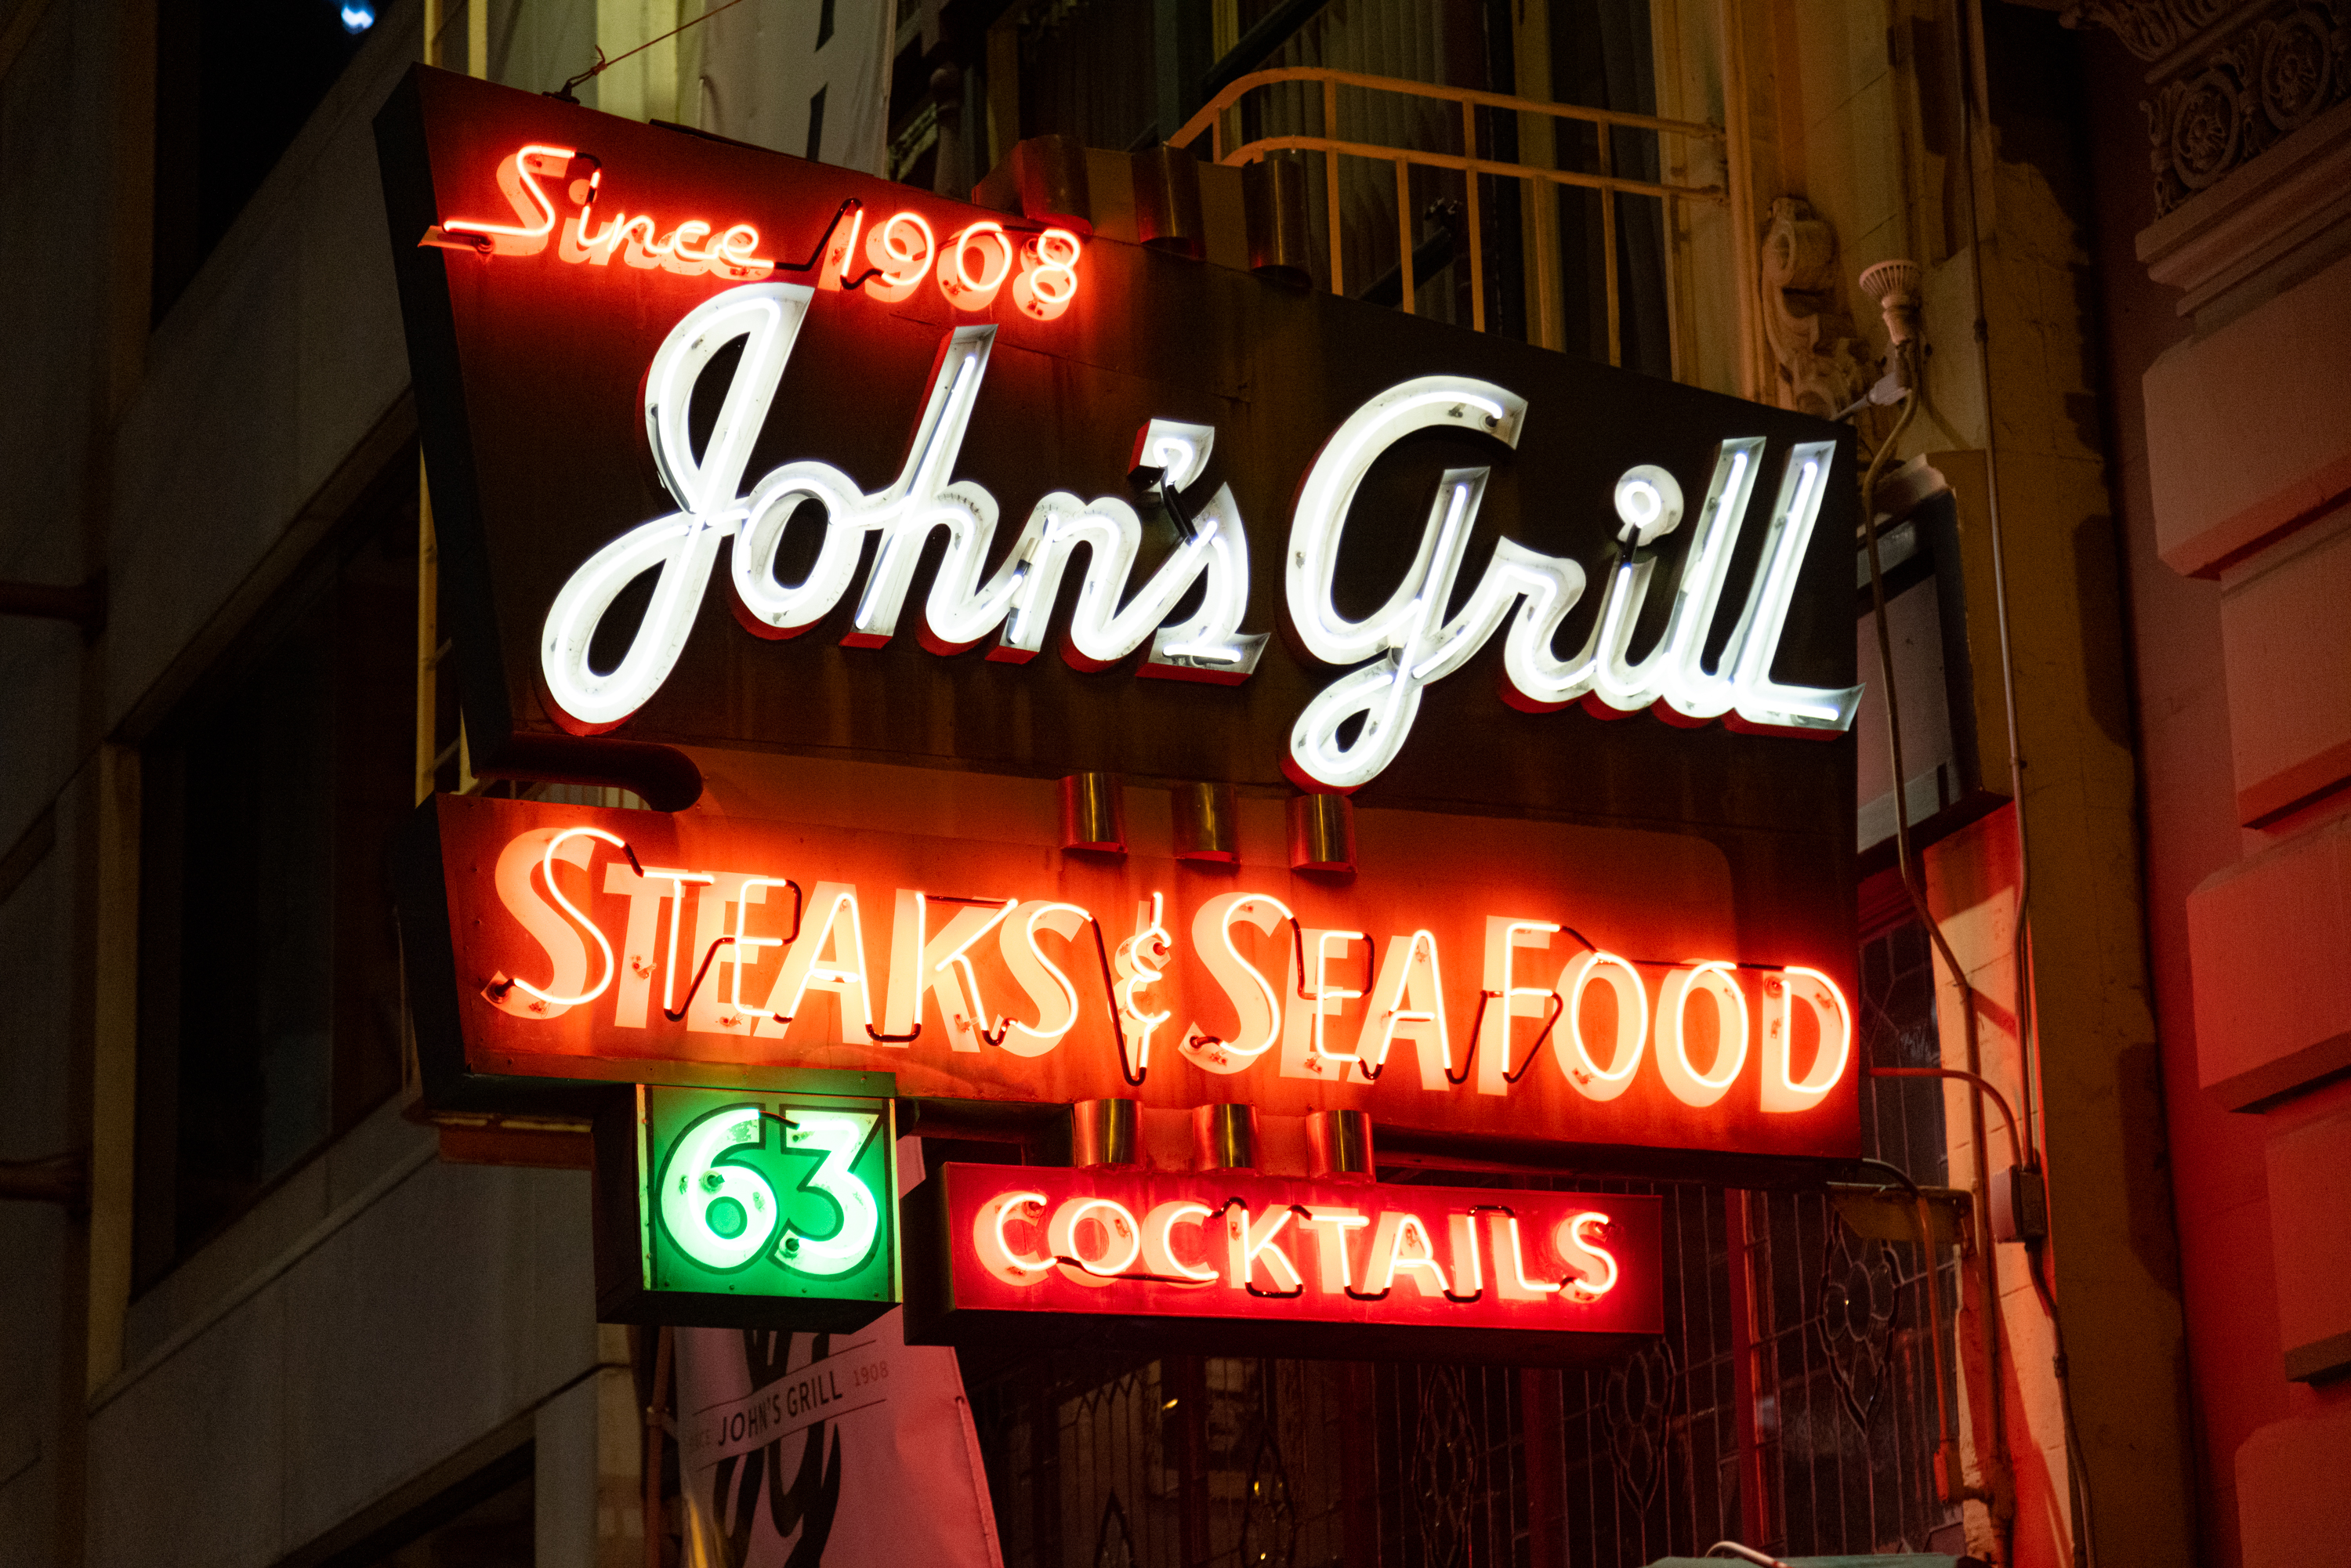 A multi-colored neon sign at night with the words &quot;Since 1908 John's Grill Steaks &amp; Seafood 63 COCKTAILS&quot;